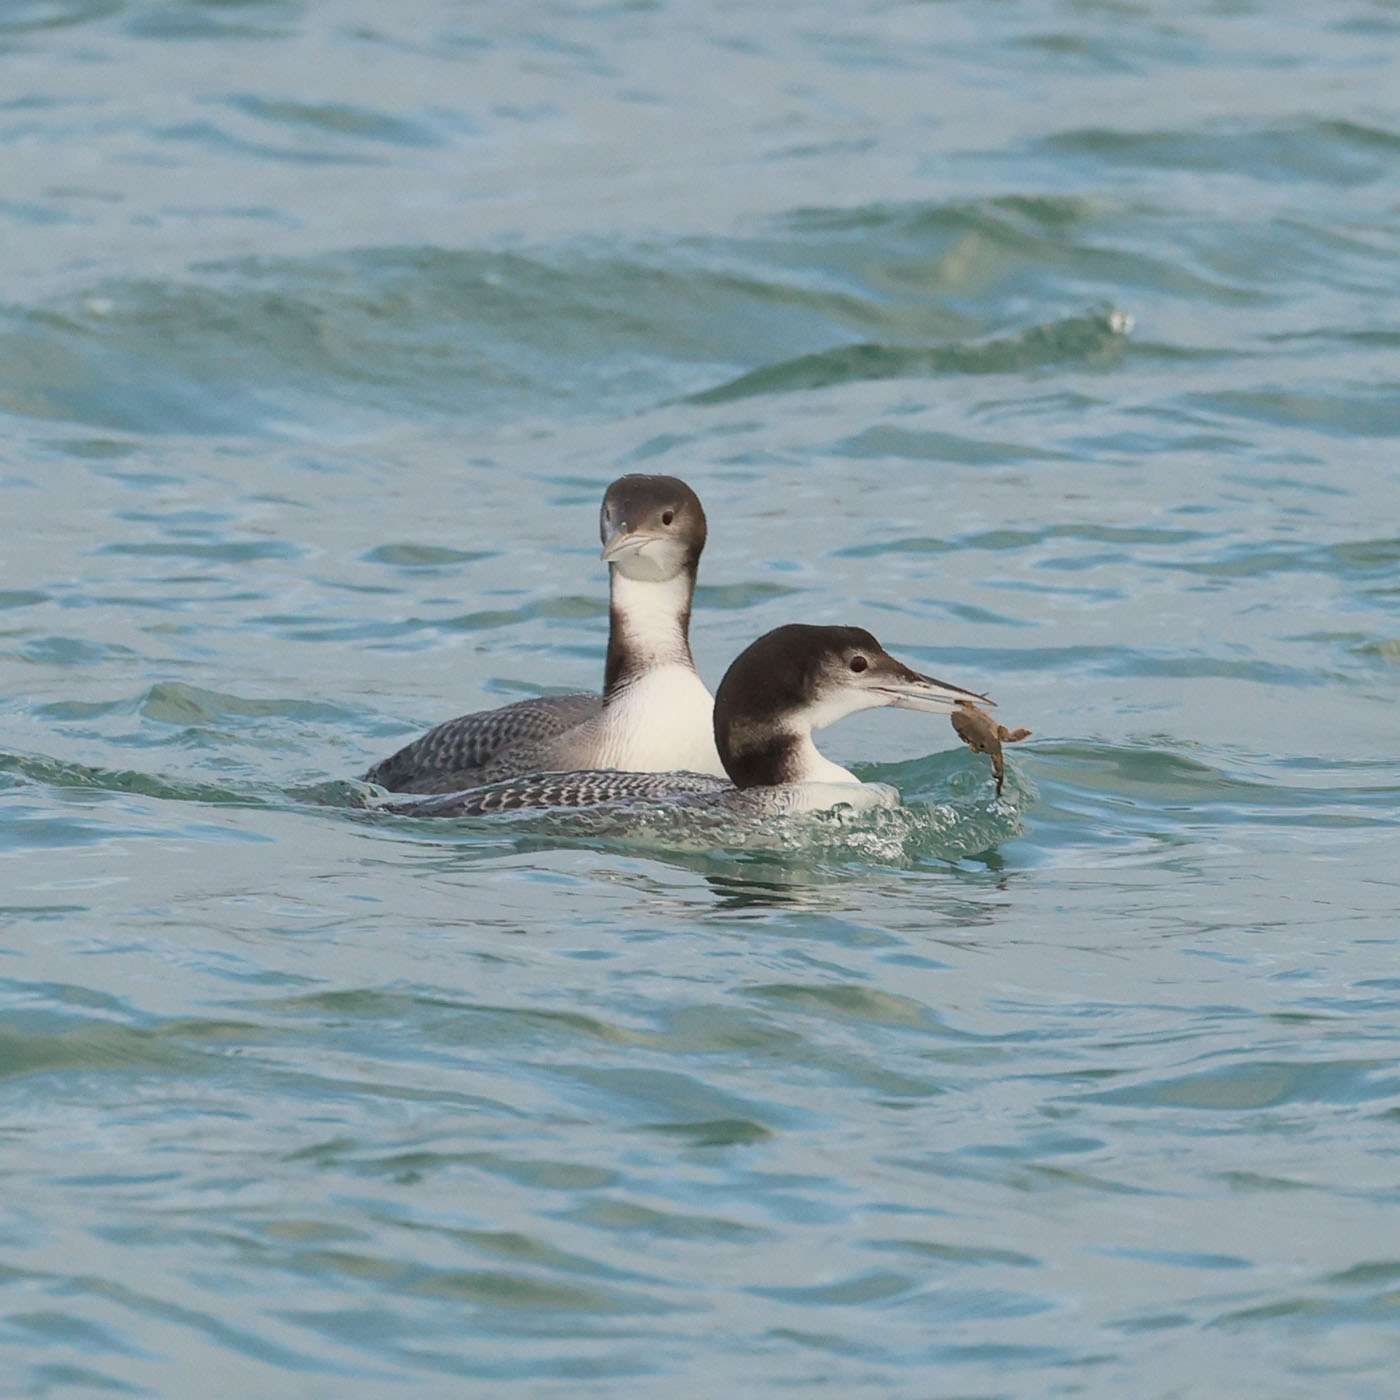 Great Northern Diver by Steve Hopper at Brixham